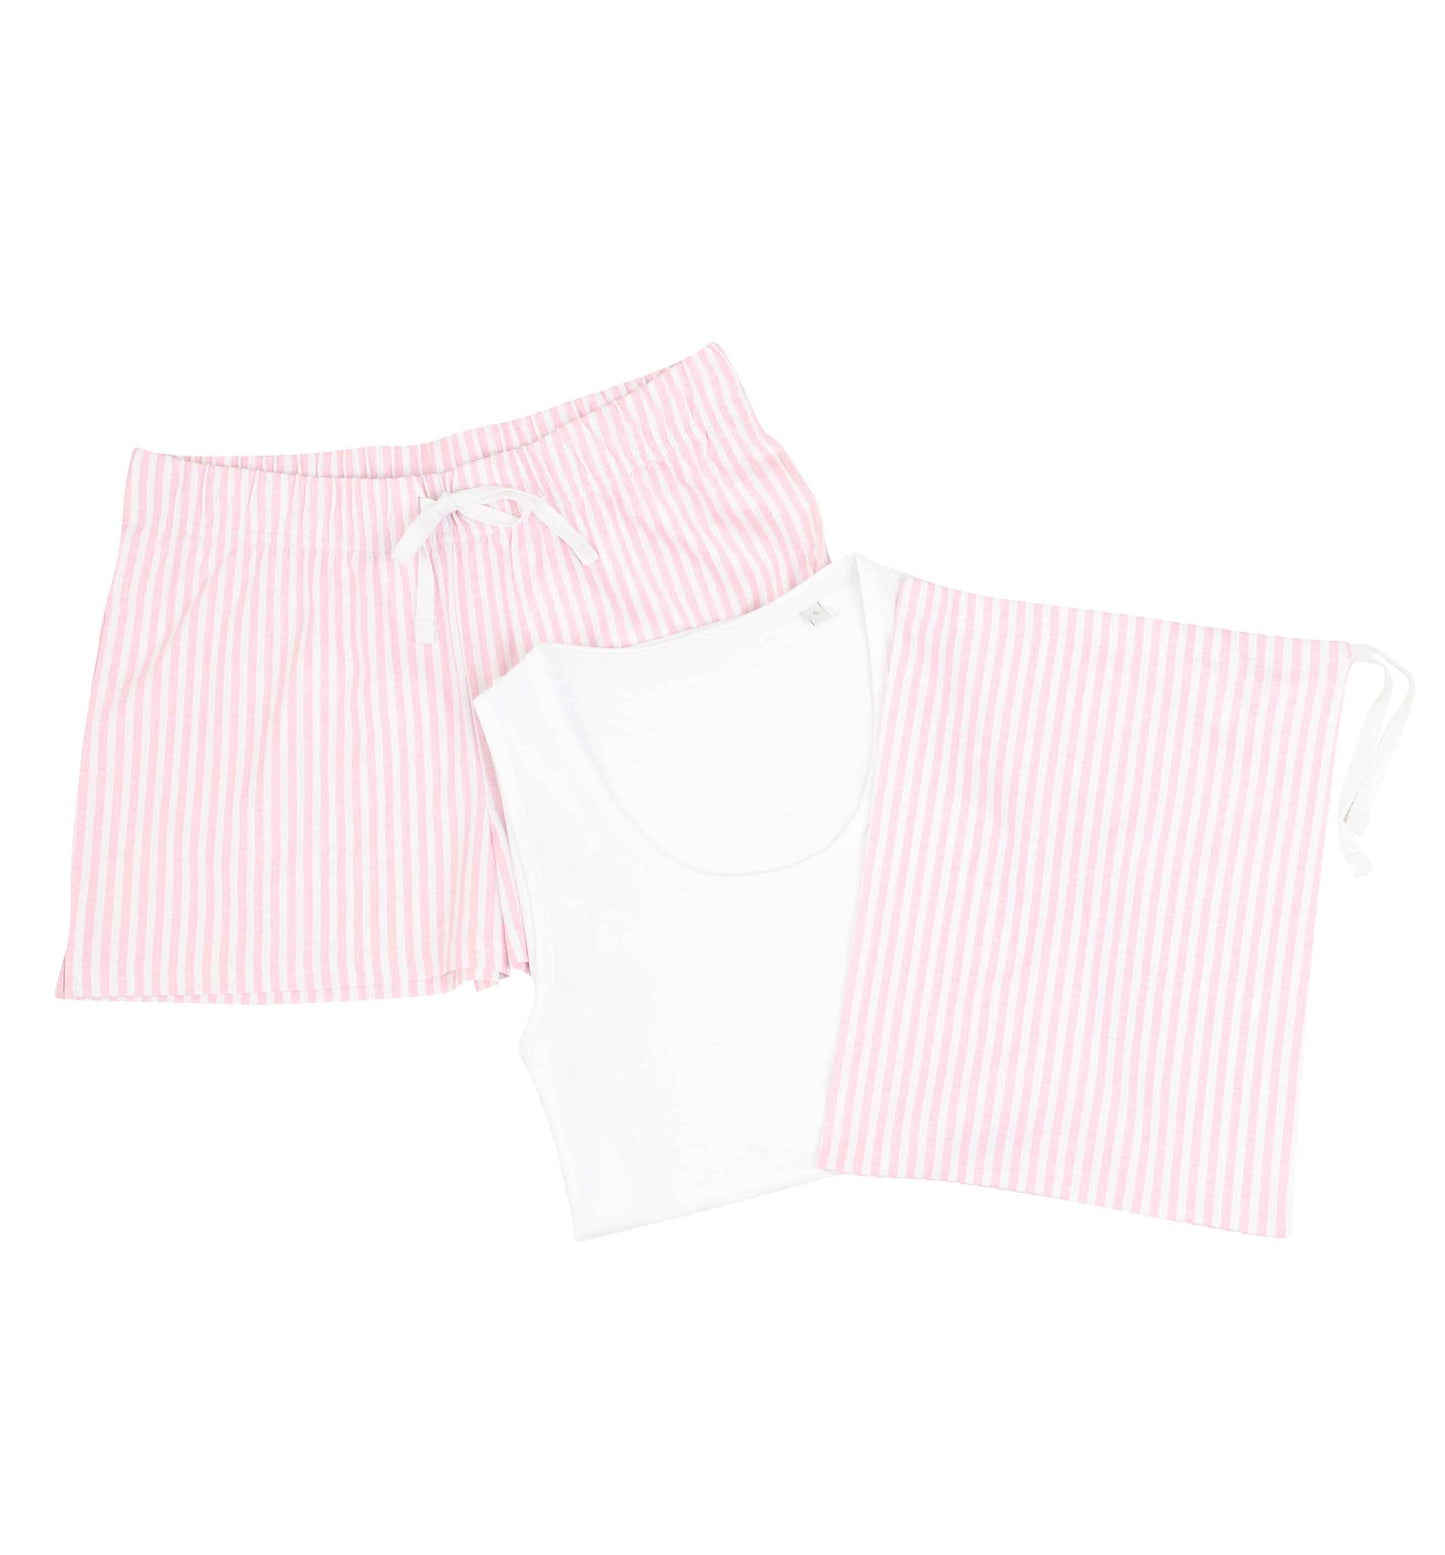 All I want for Christmas is an airfryer| Pyjama shorts set